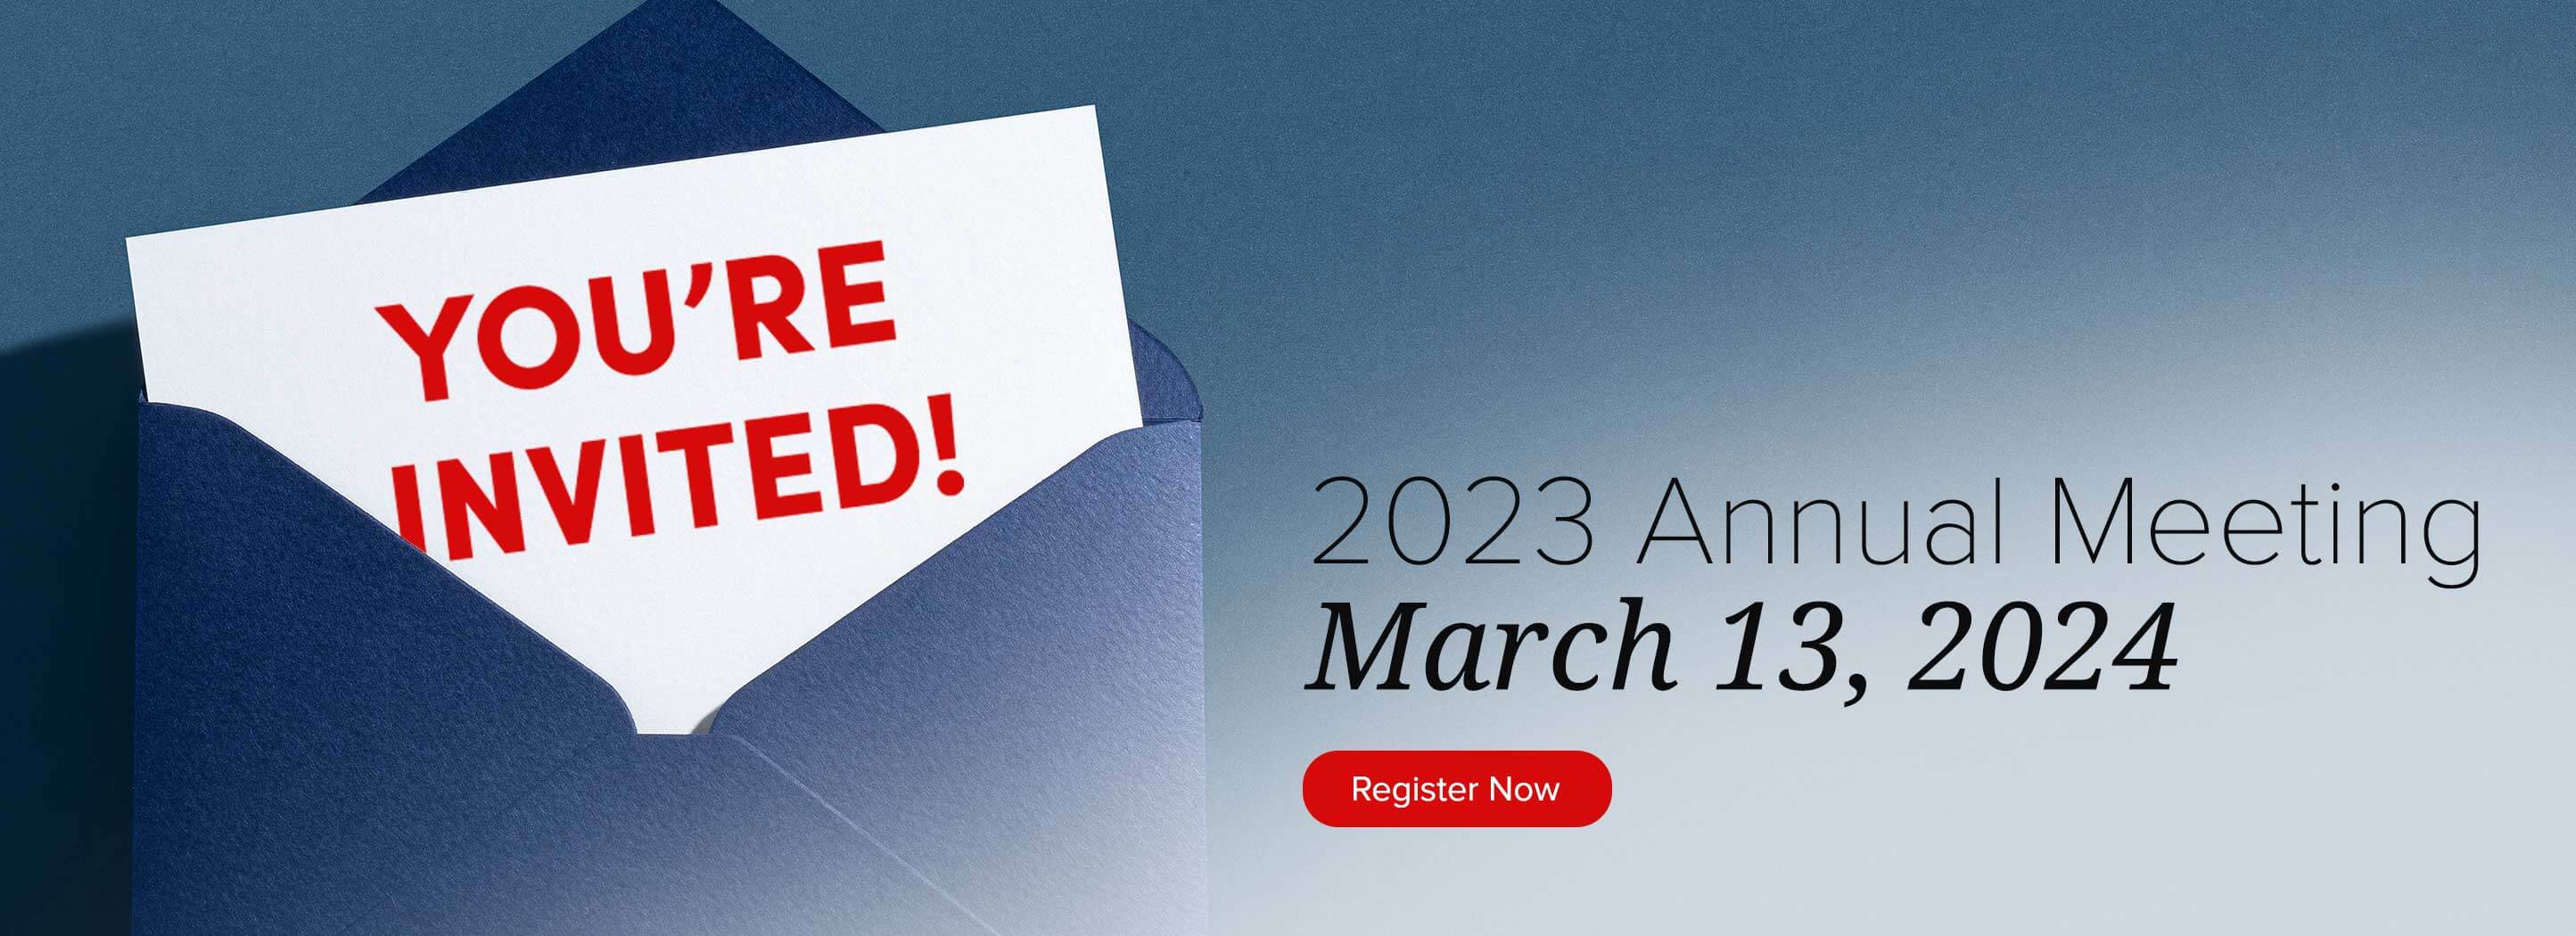 You're invited! 2023 Annual Meeting. March 13, 2024. Register Now.